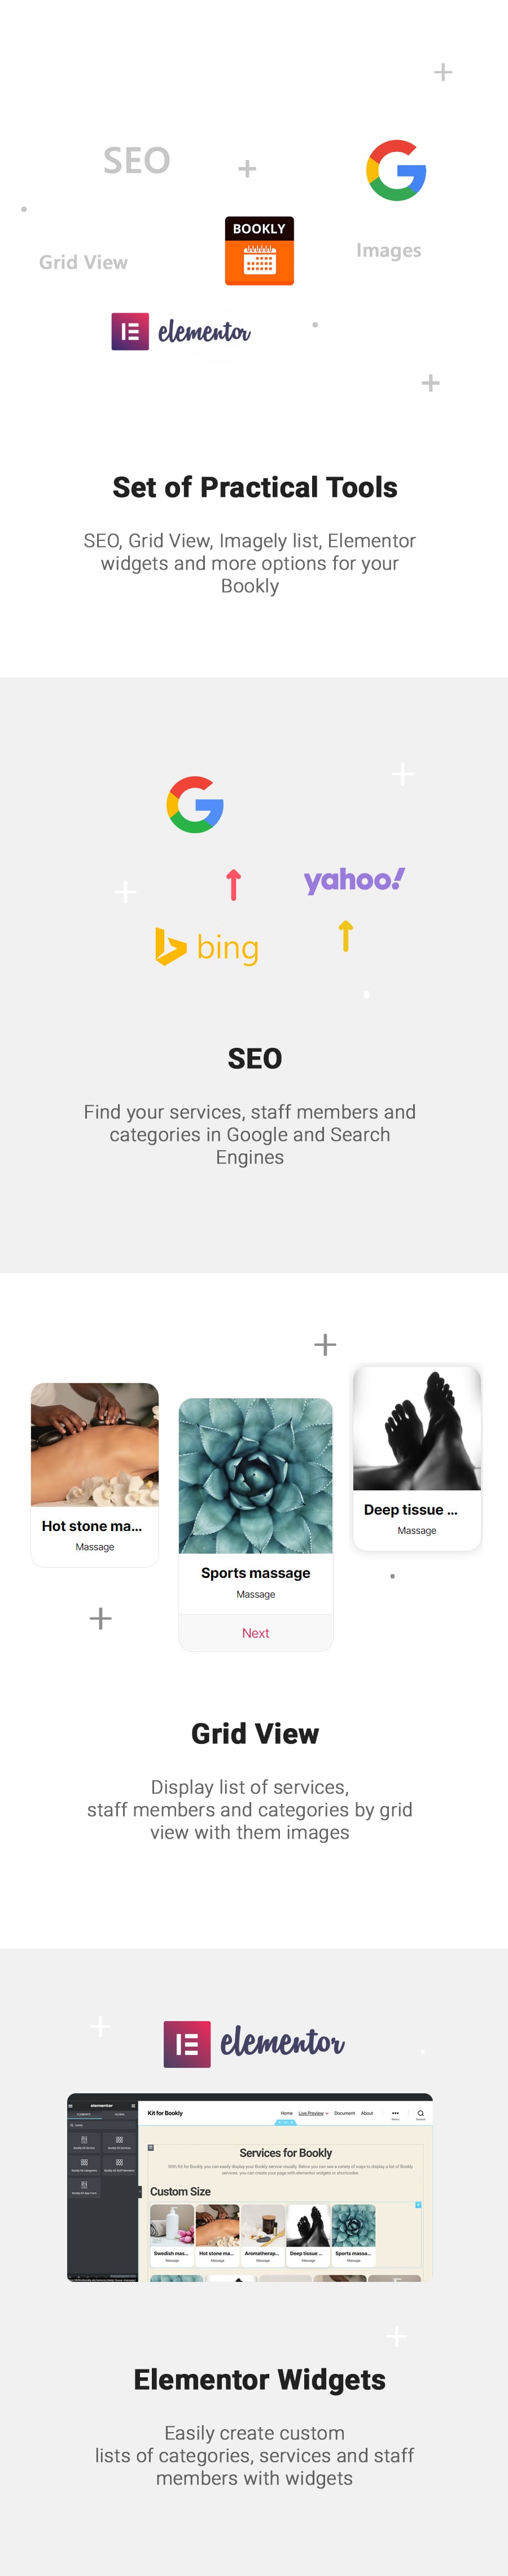 Kit for Bookly - seo, display with images, elementor widgets